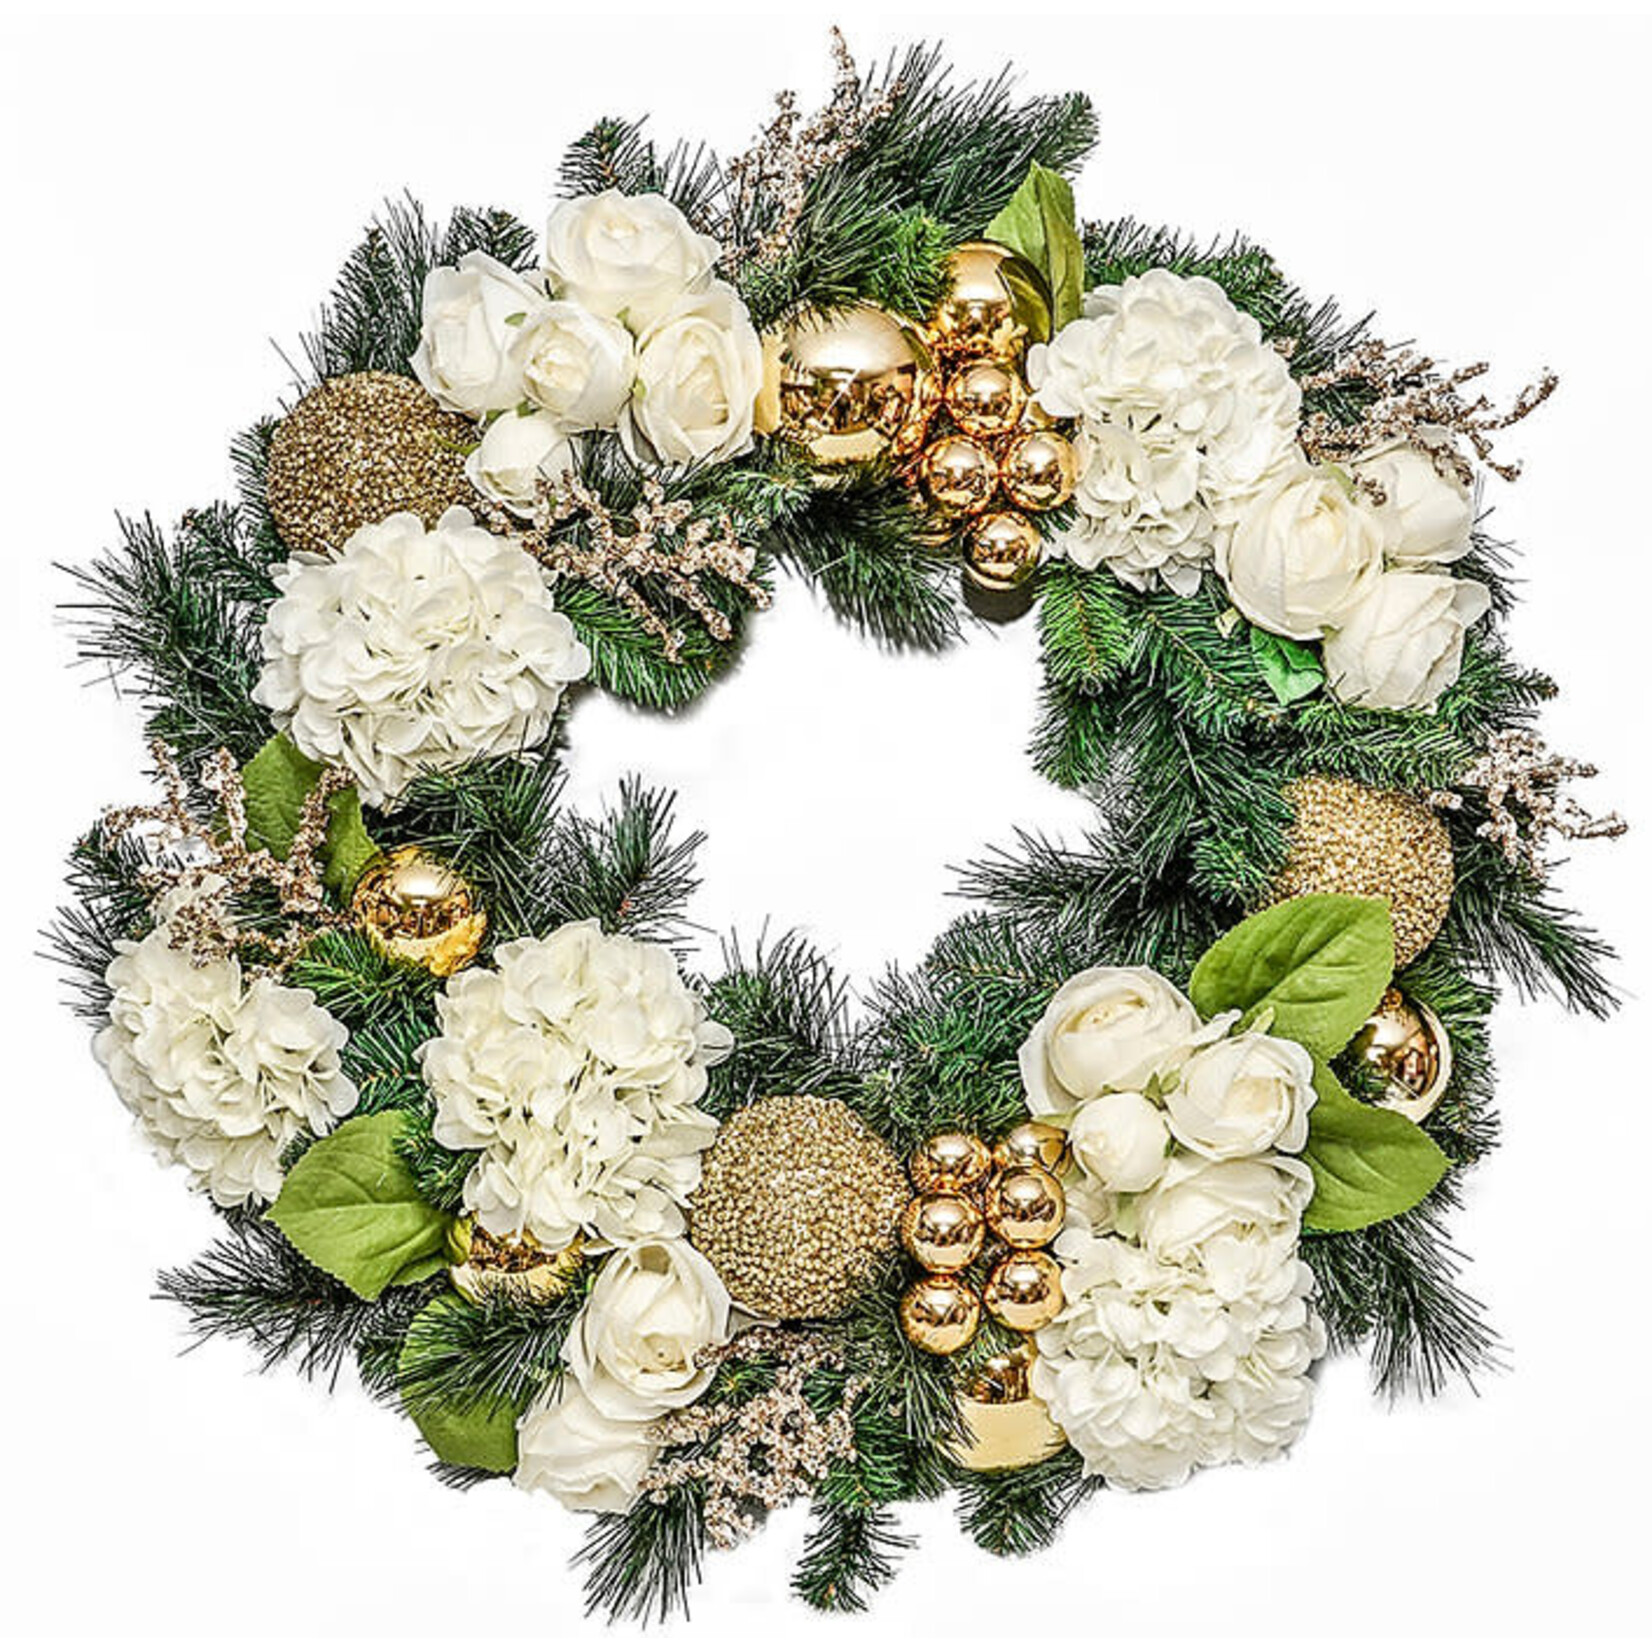 The Ivy Guild White Ivory Rose Hydrangea Wreath